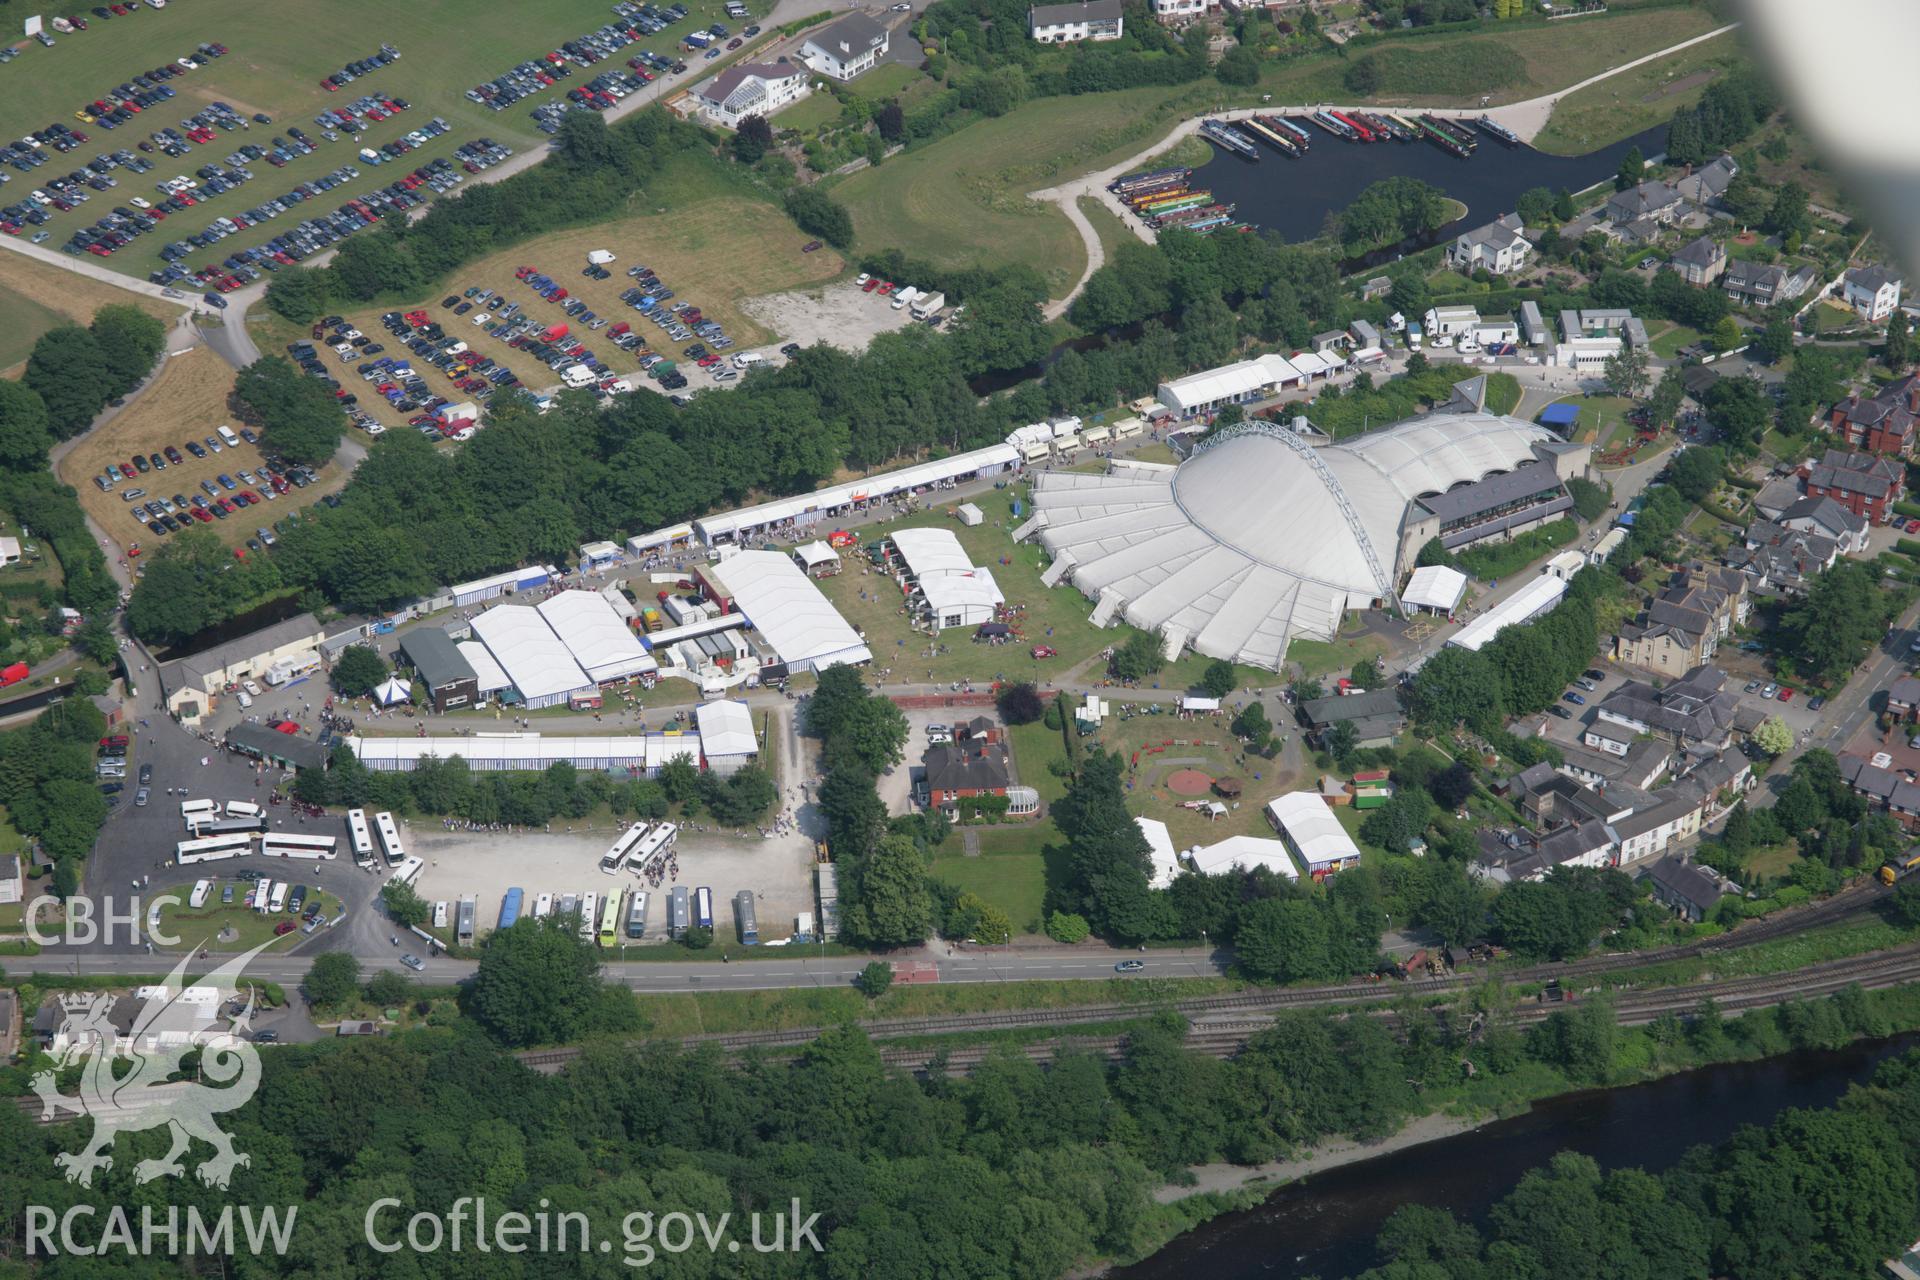 RCAHMW colour oblique aerial photograph of Royal International Pavilion, Llangollen. Taken on 04 July 2006 by Toby Driver.